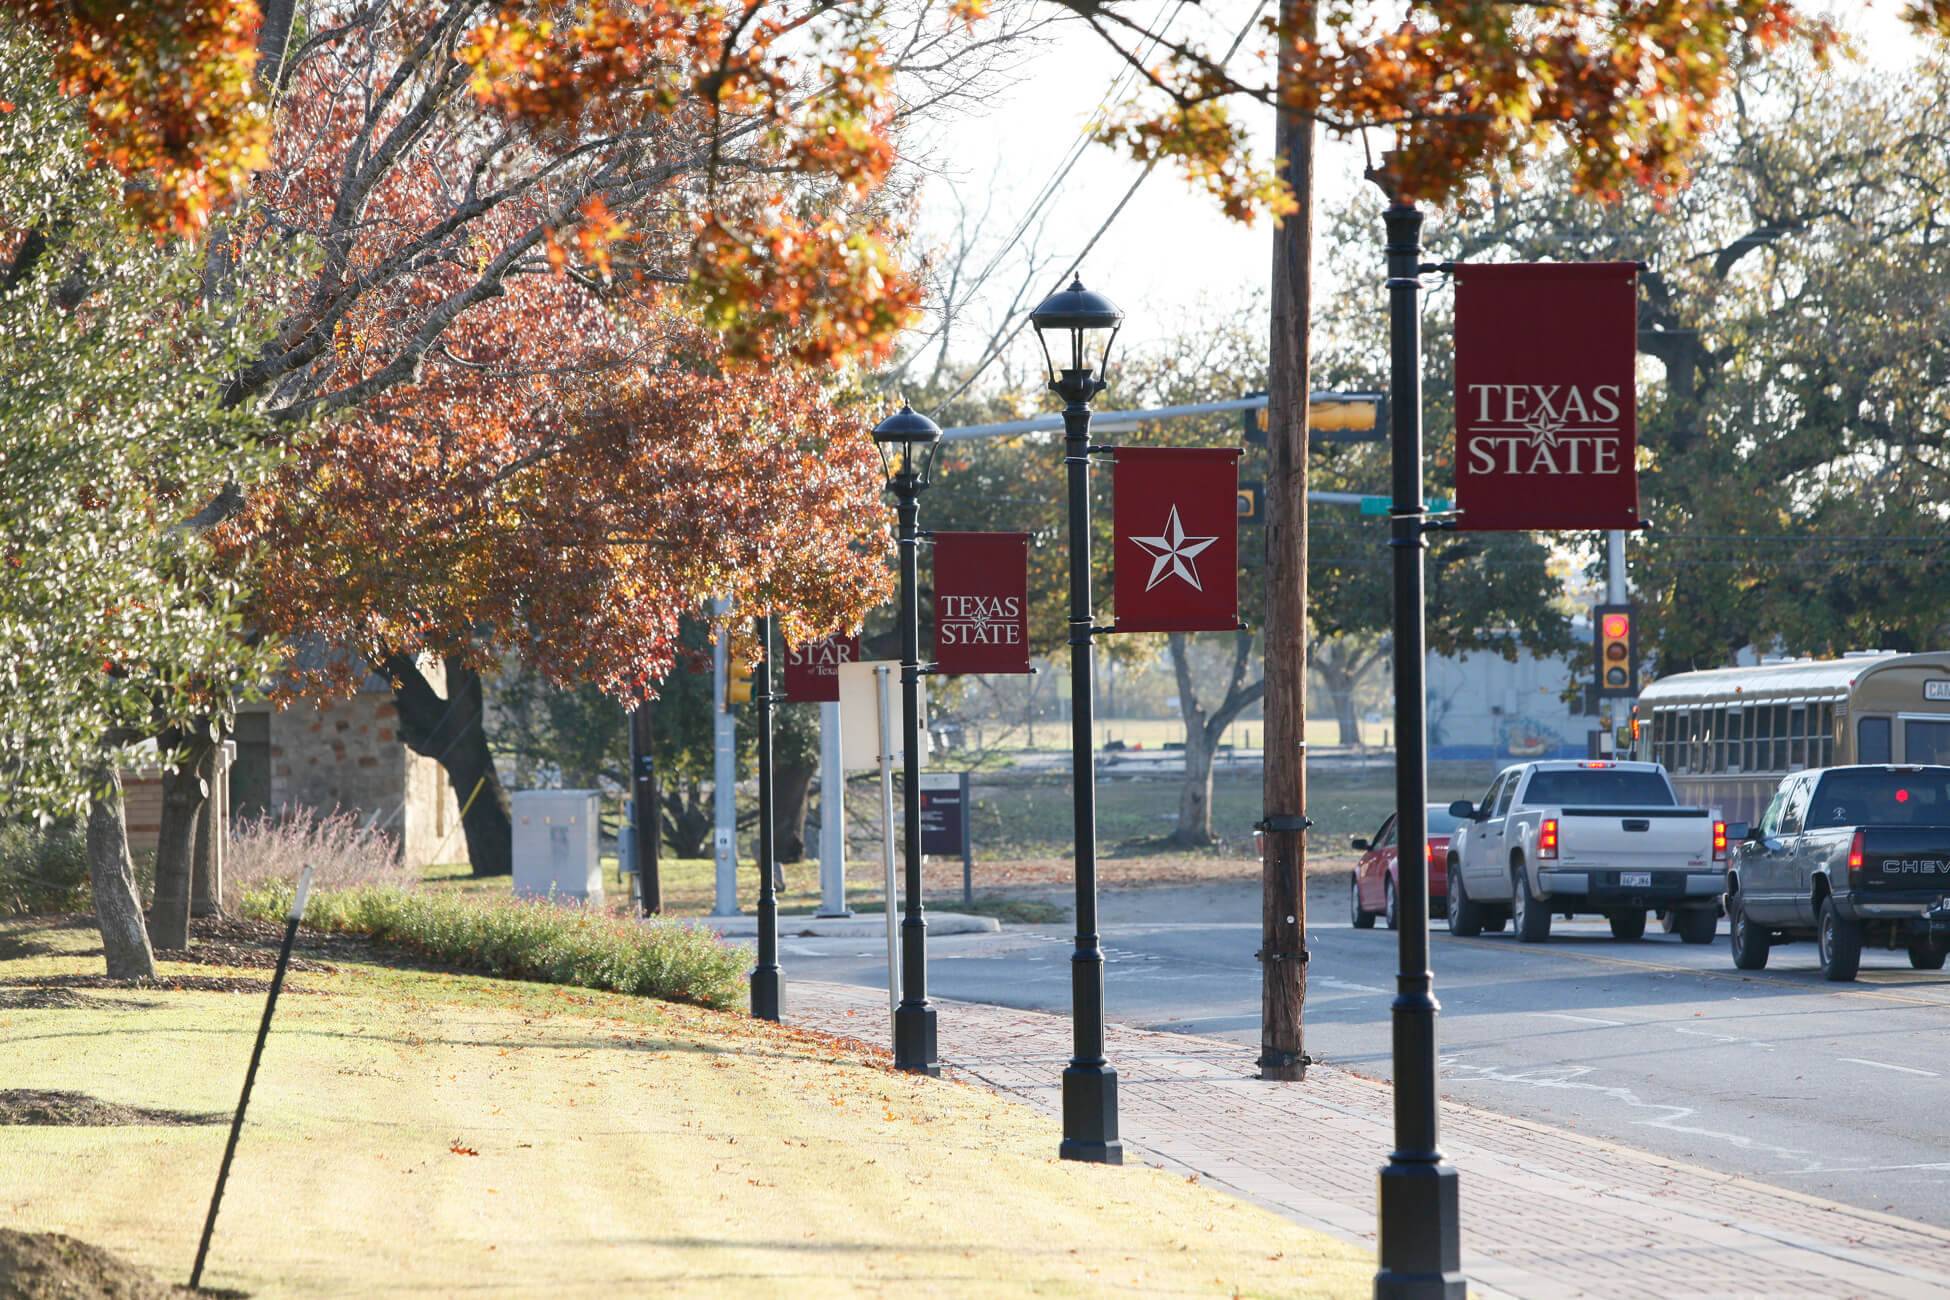 Texas State Banners on the side of the road